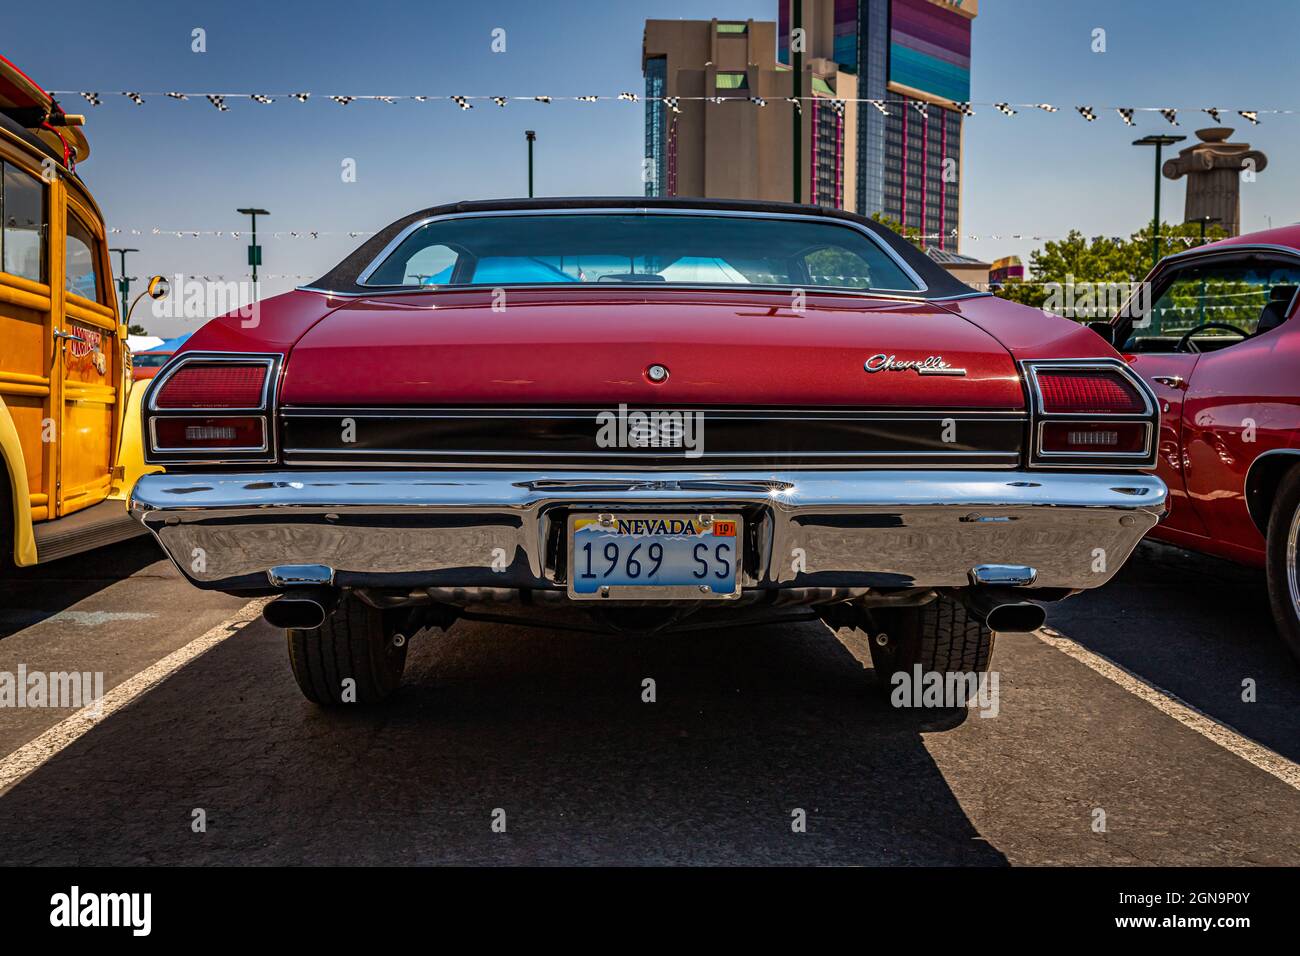 Reno, NV - August 3, 2021: 1969 Chevrolet Chevelle SS Hardtop Coupe at a local car show. Stock Photo